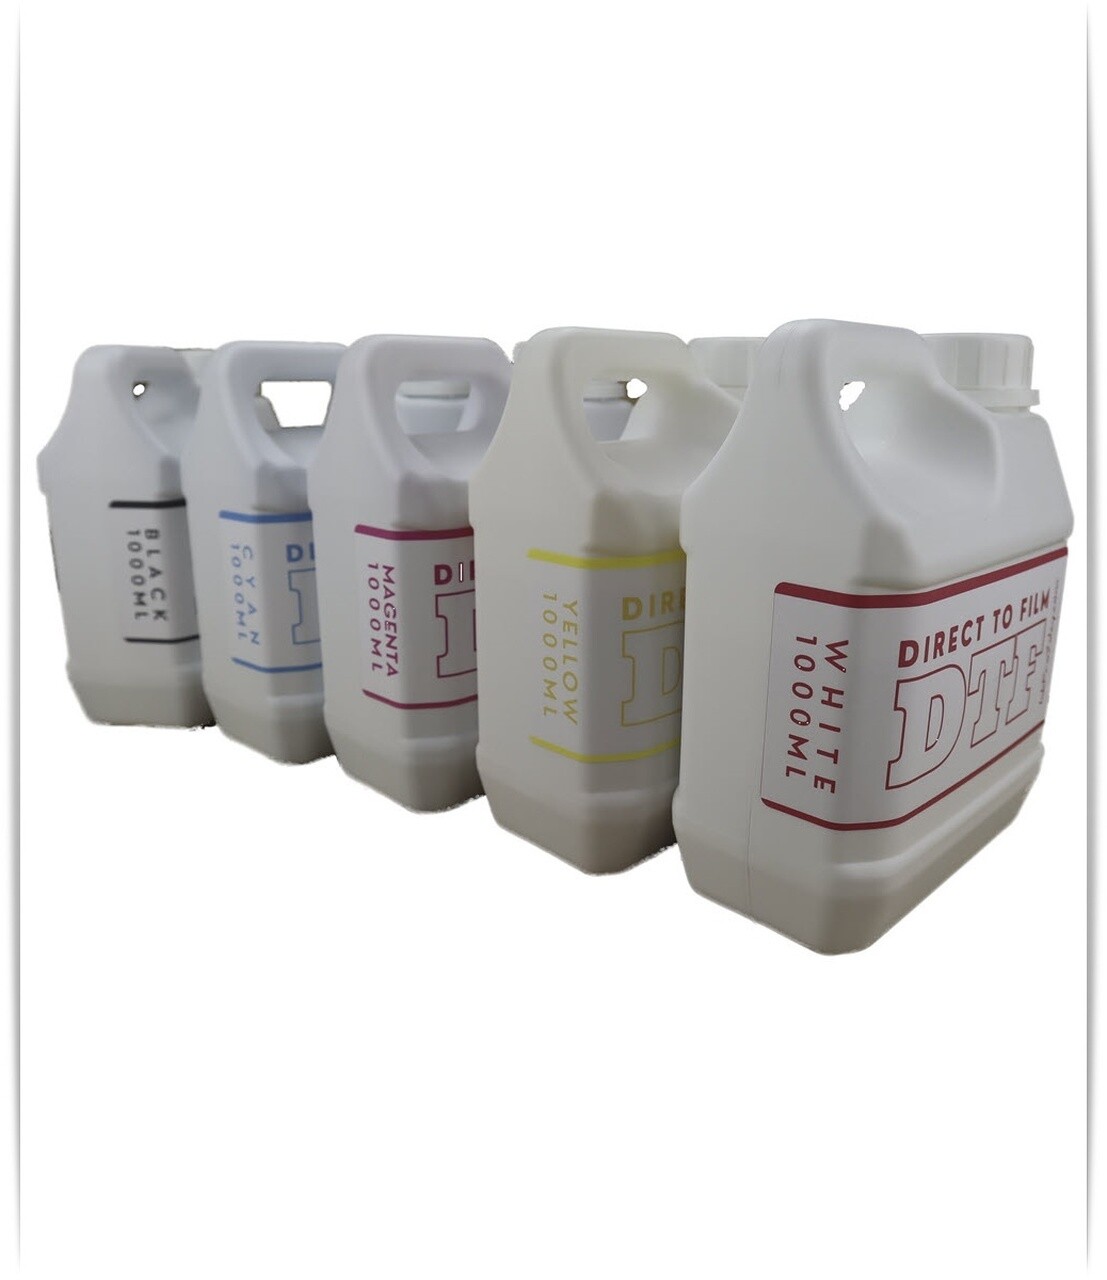 DTF Ink Direct To Film 5- 1000ml Bottles for Epson, Epson Print Head printers